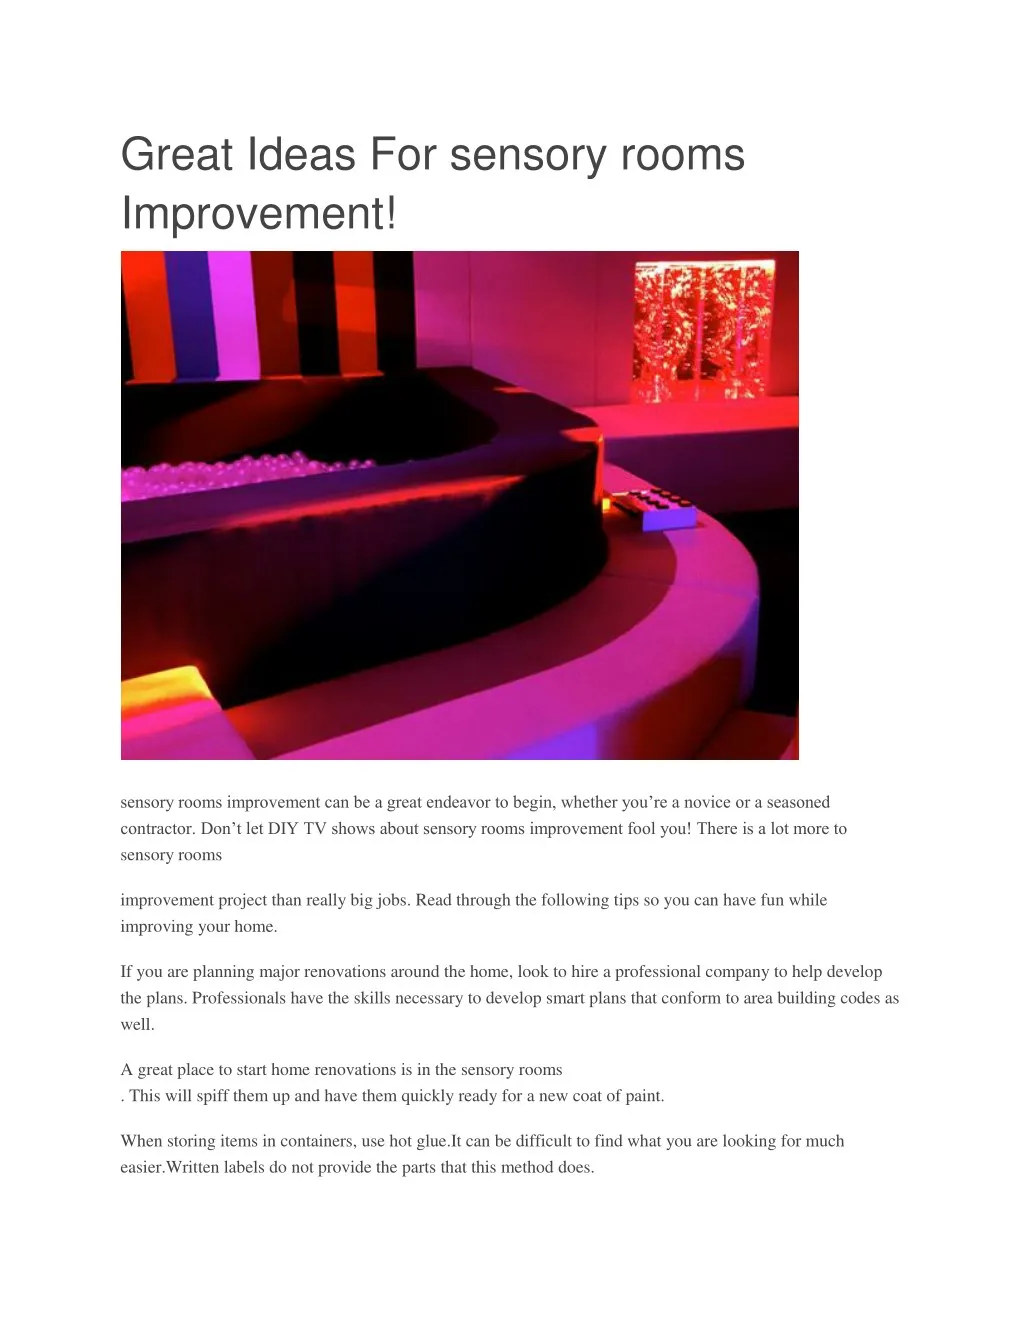 great ideas for sensory rooms improvement